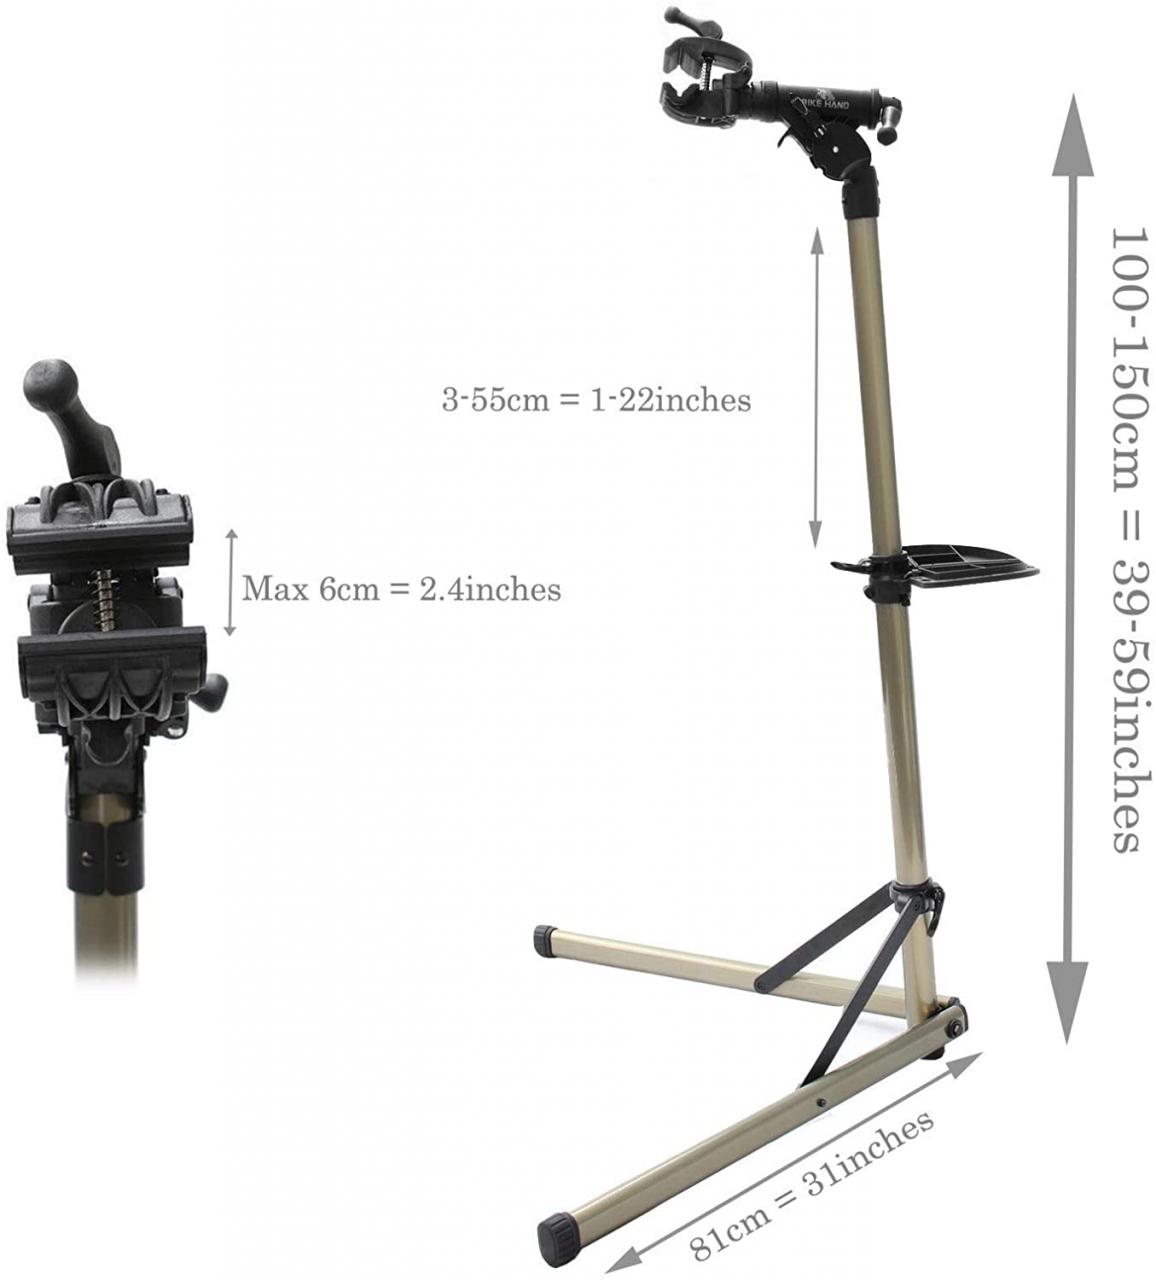 The 5 Best Bike Repair Stands [Ranked] - Product Reviews and Ratings